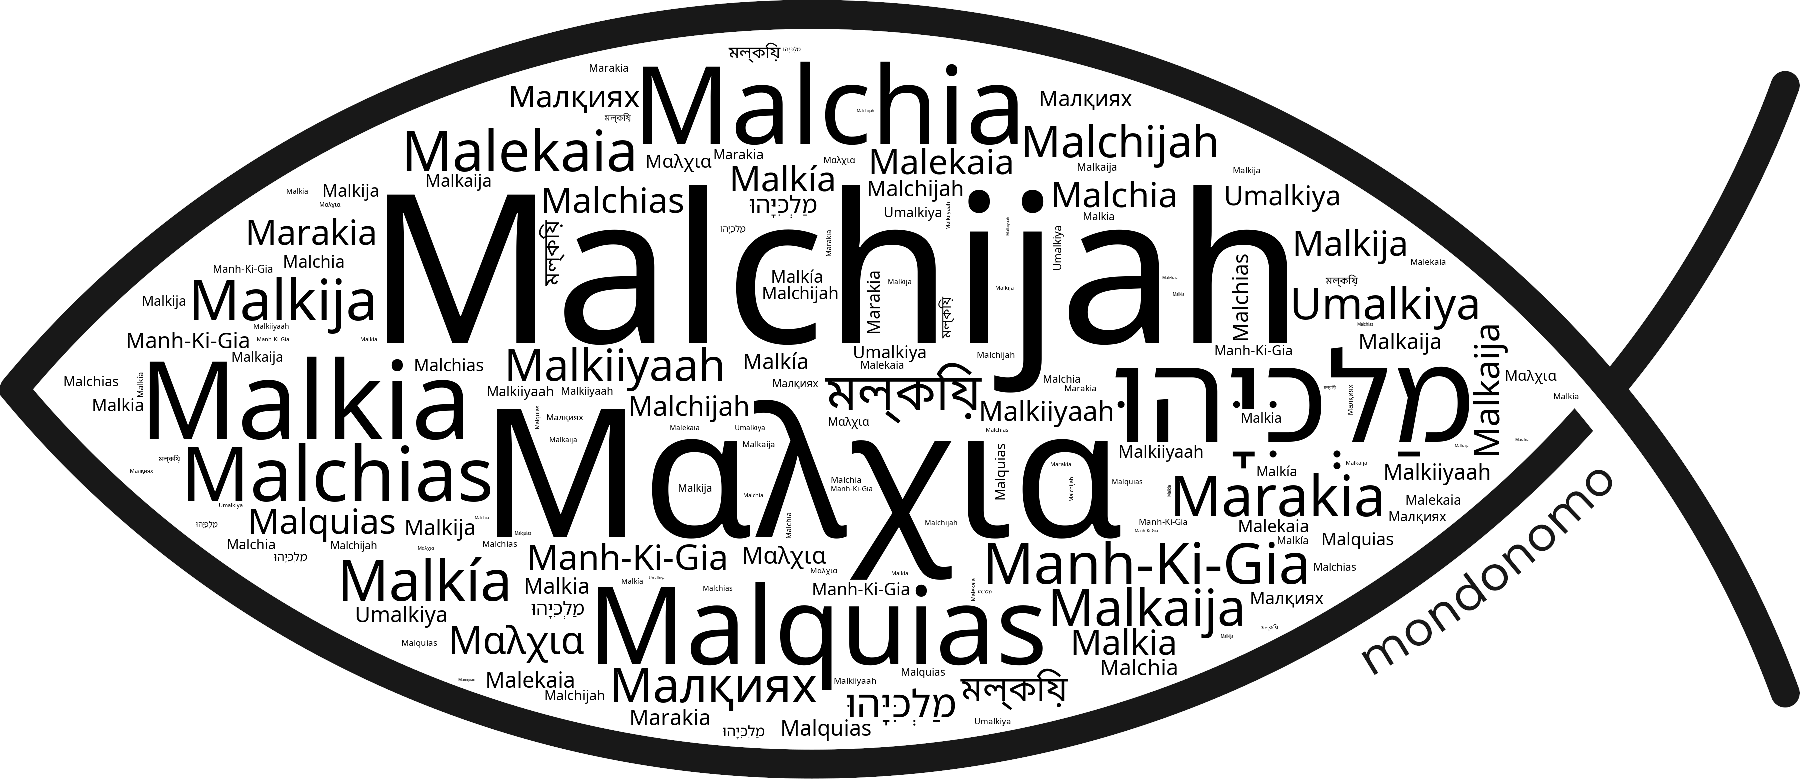 Name Malchijah in the world's Bibles